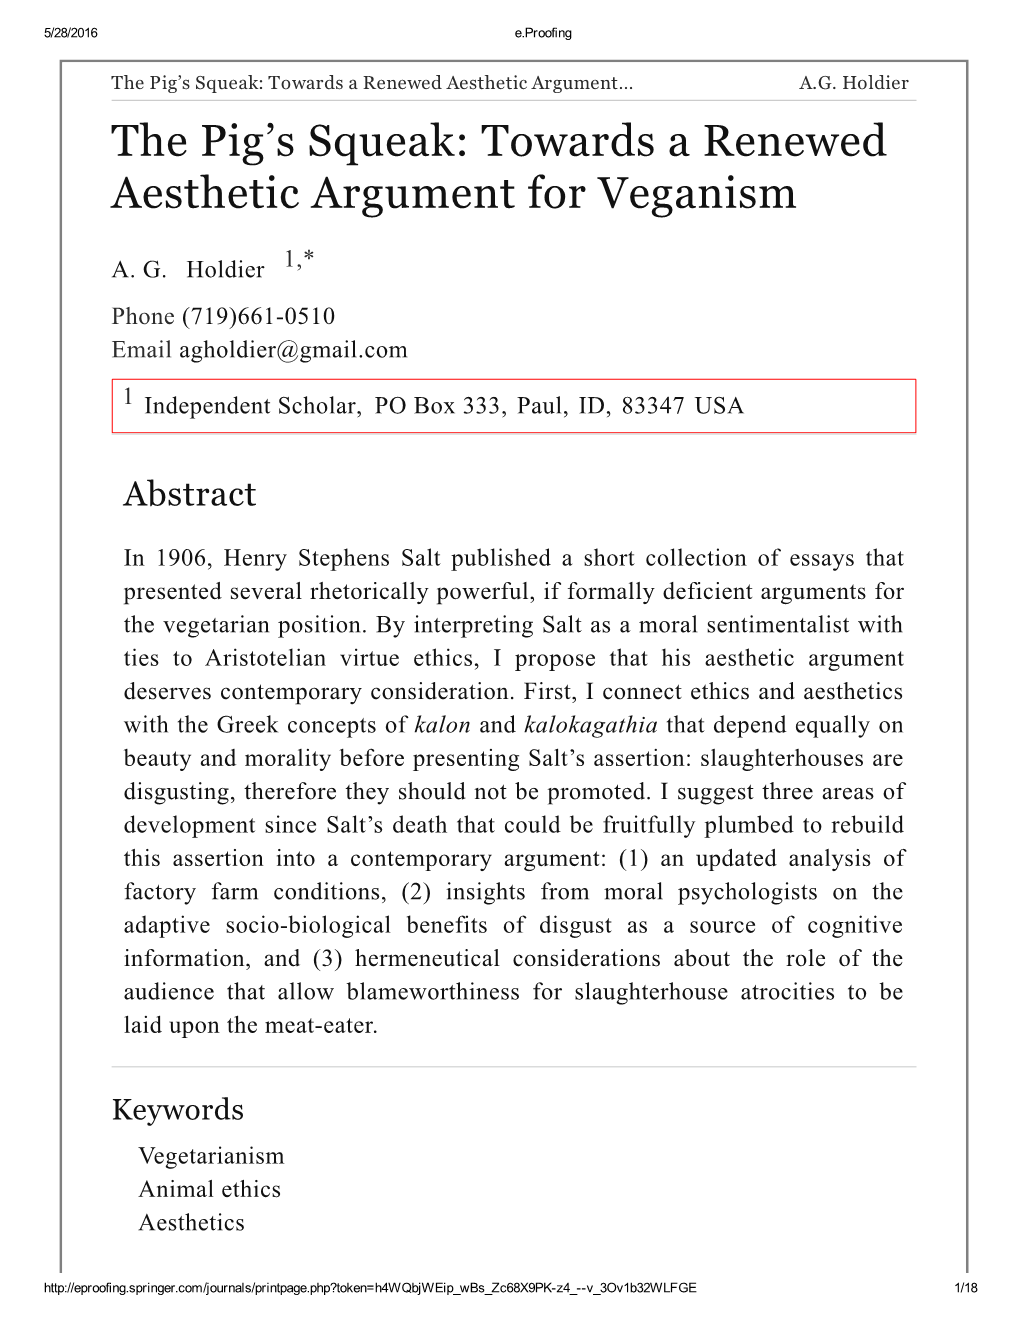 Towards a Renewed Aesthetic Argument for Veganism